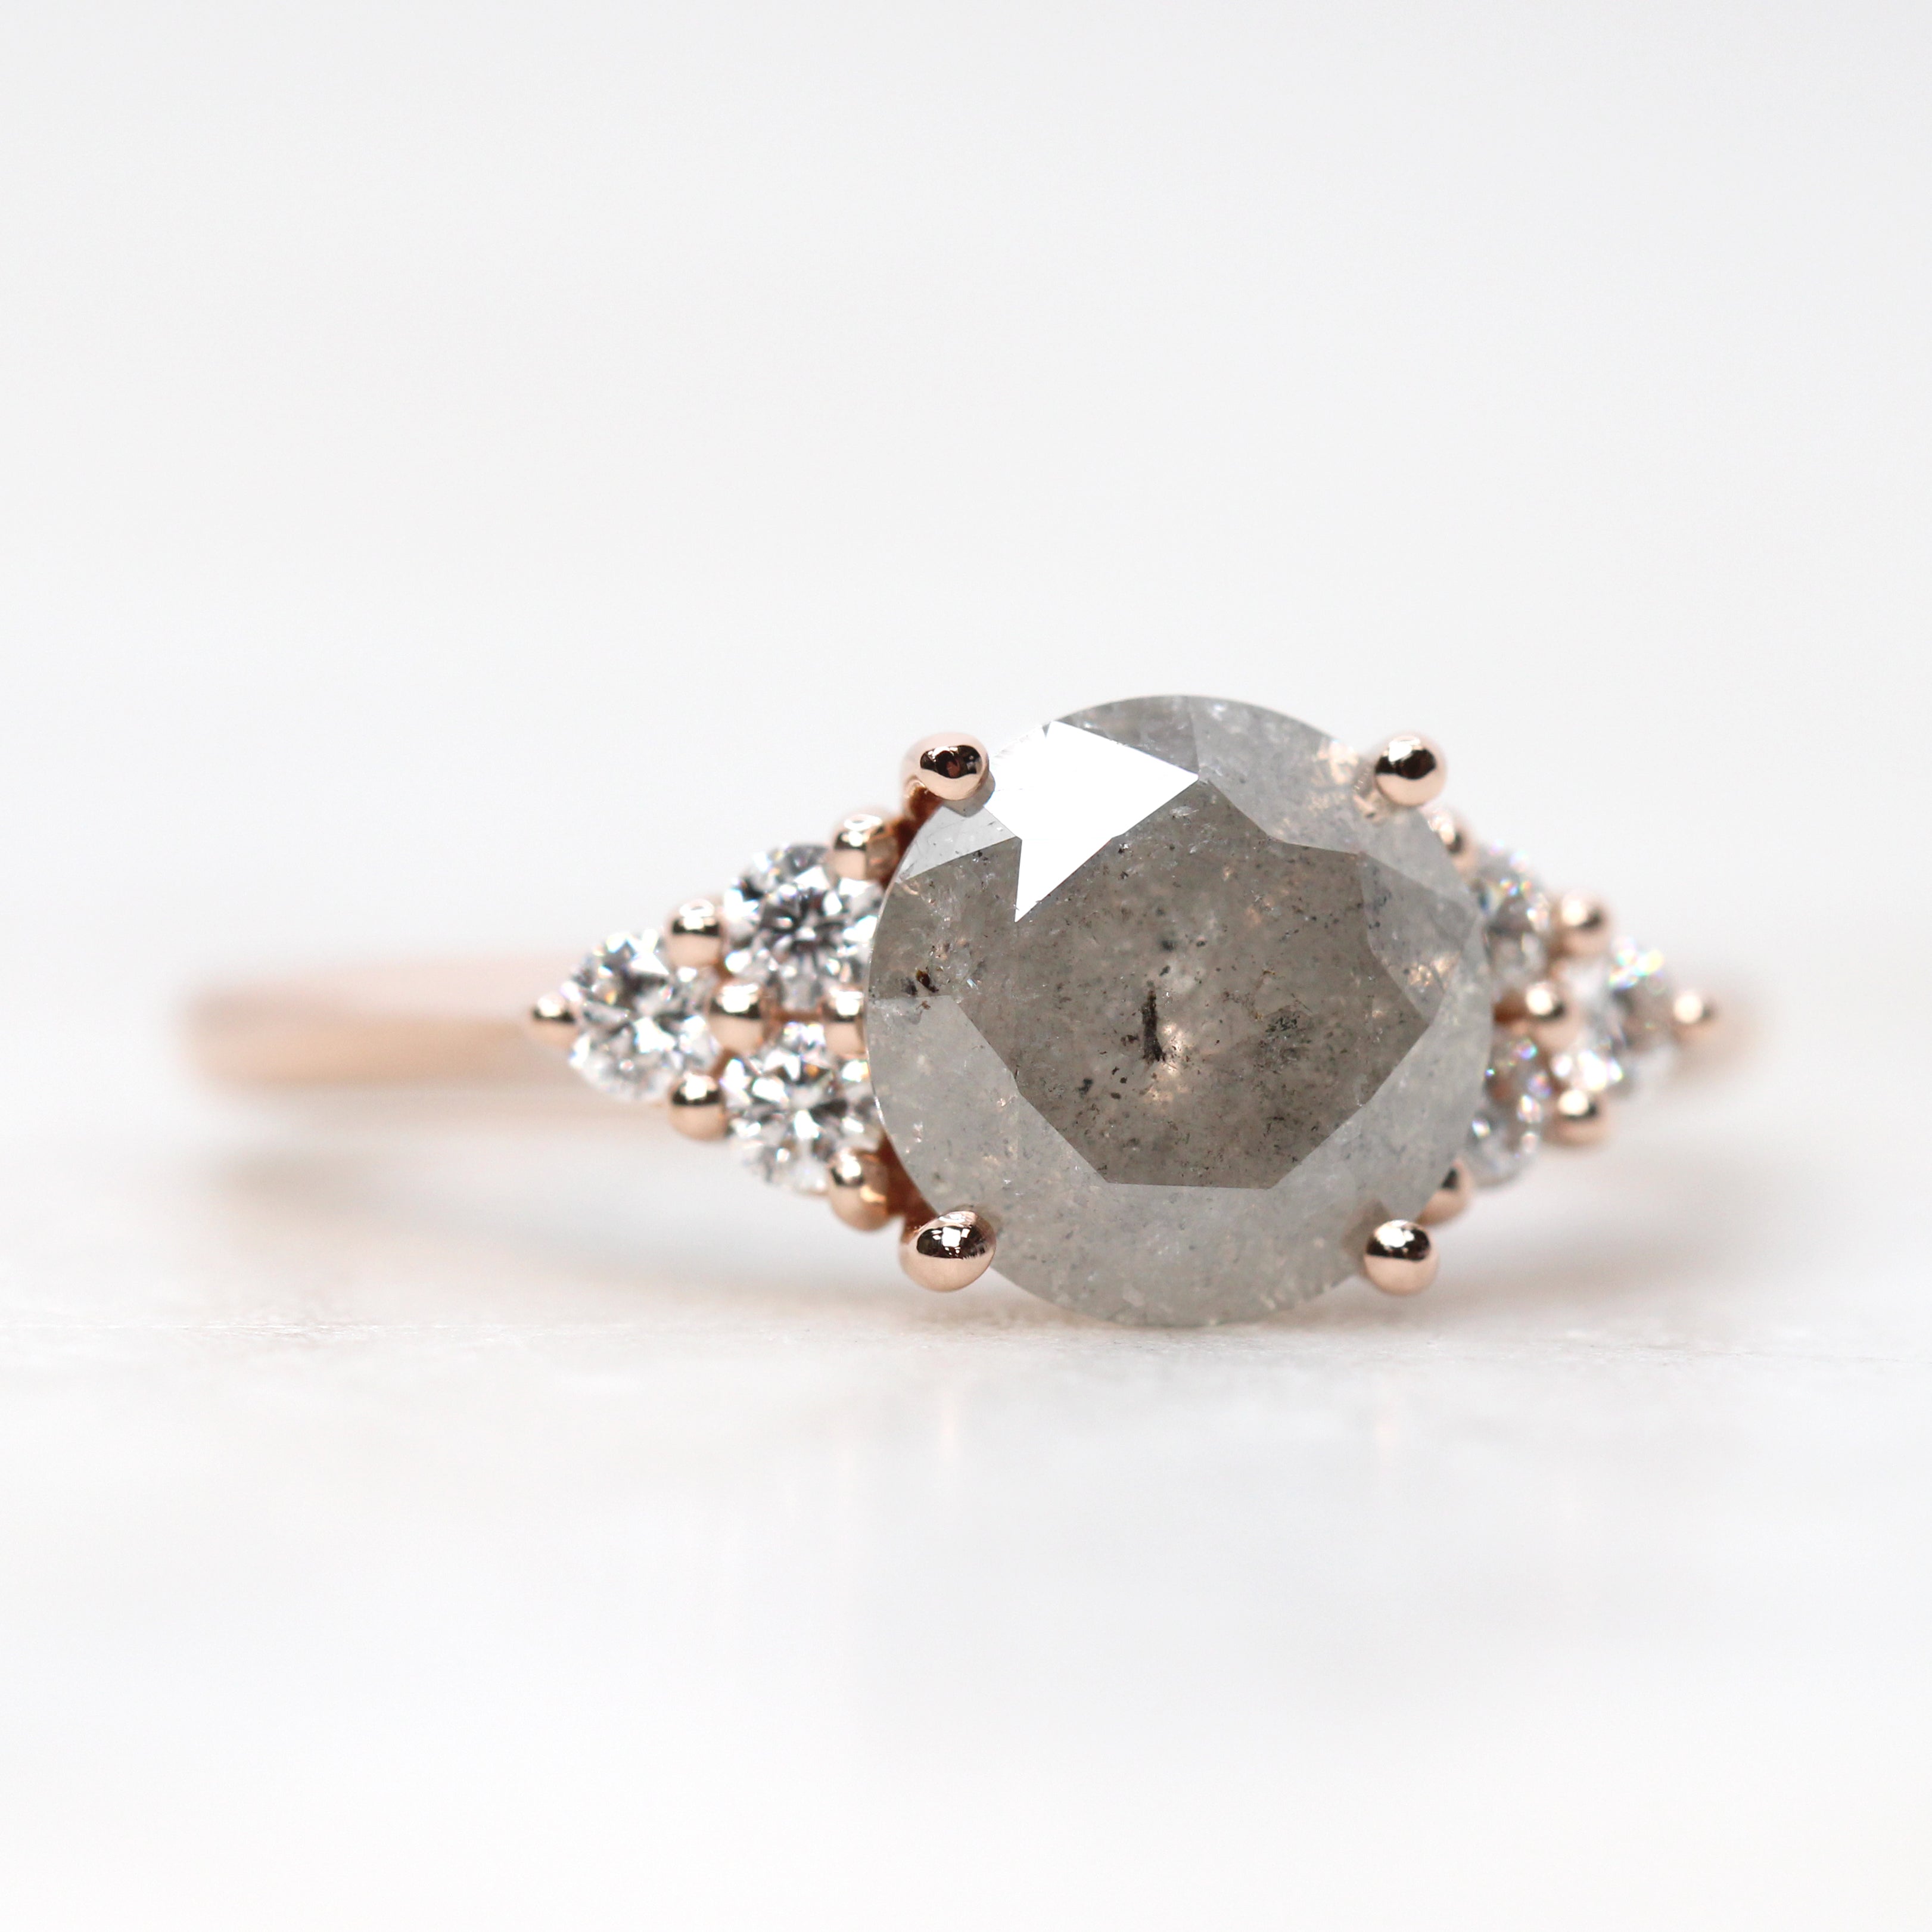 Aster Ring with a 2.15 Carat Round Light Gray Celestial Diamond and White Accent Diamonds in 14k Rose Gold - Ready to Size and Ship - Midwinter Co. Alternative Bridal Rings and Modern Fine Jewelry